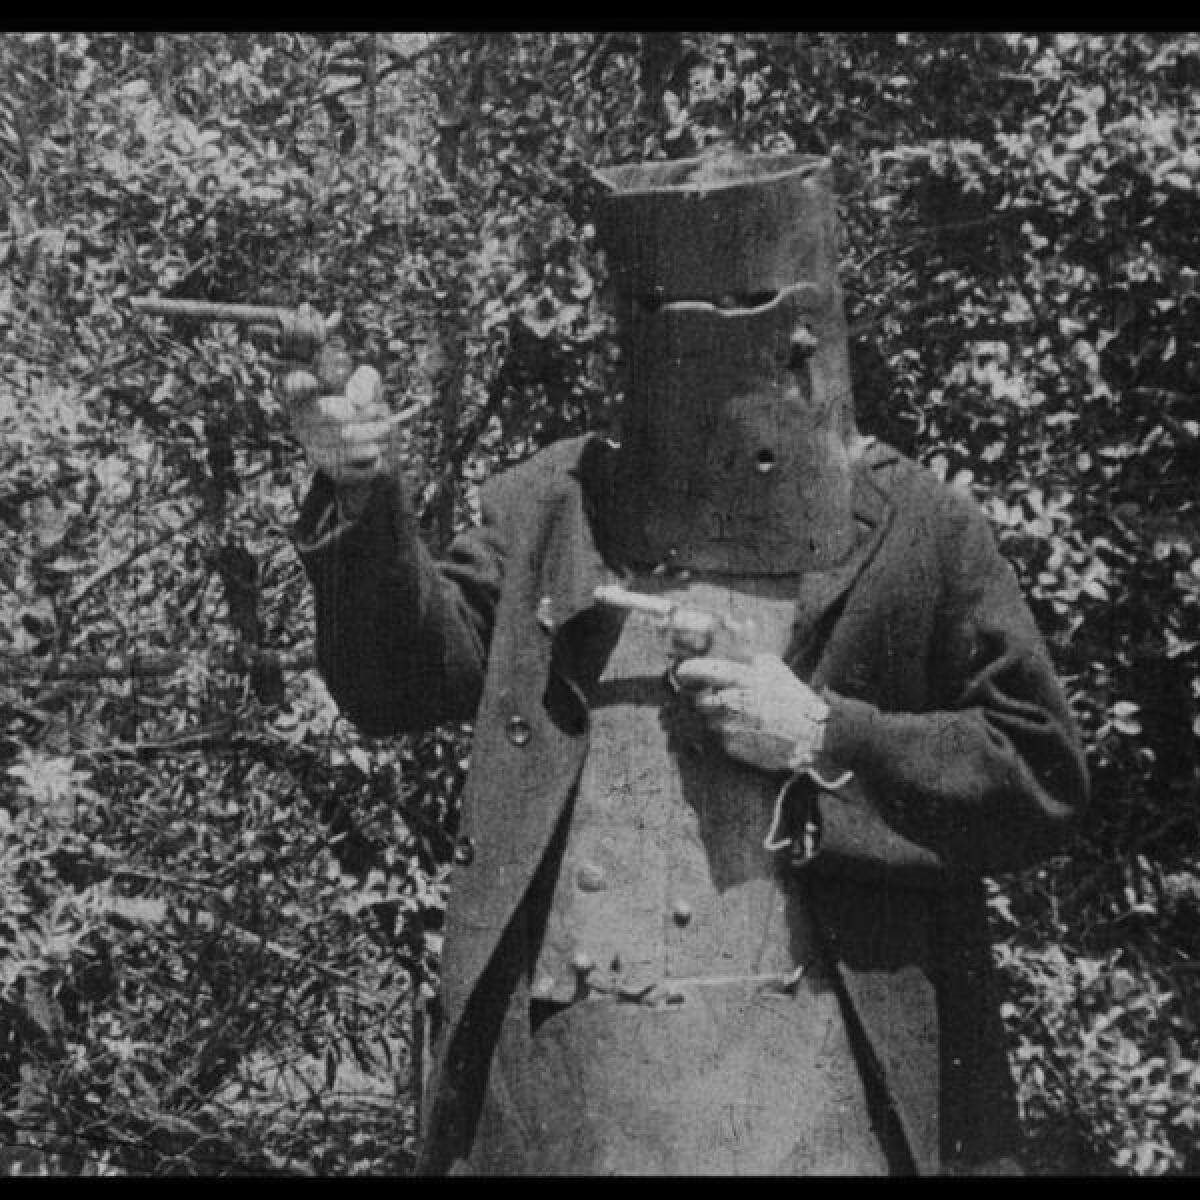 The worldâ€™s first feature film The Story of The Kelly Gang